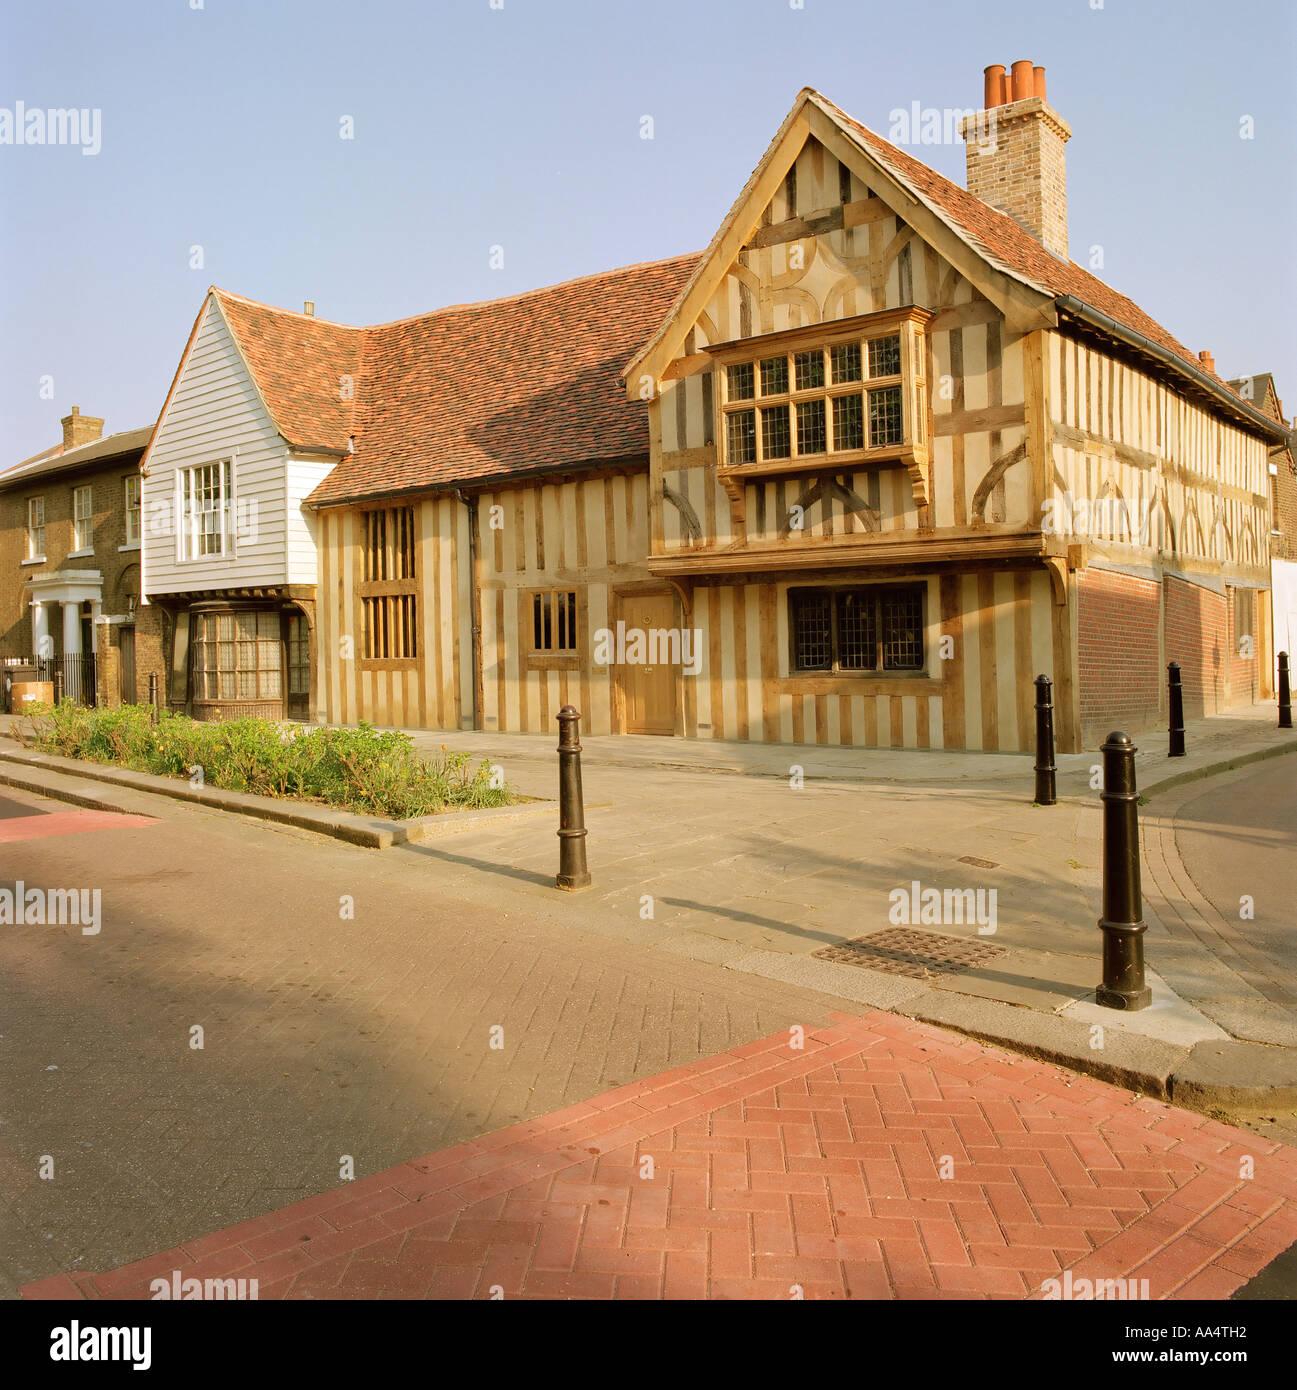 The Ancient House a grade 2 listed 15th century timber framed hall in Walthamstow London E17 England Stock Photo